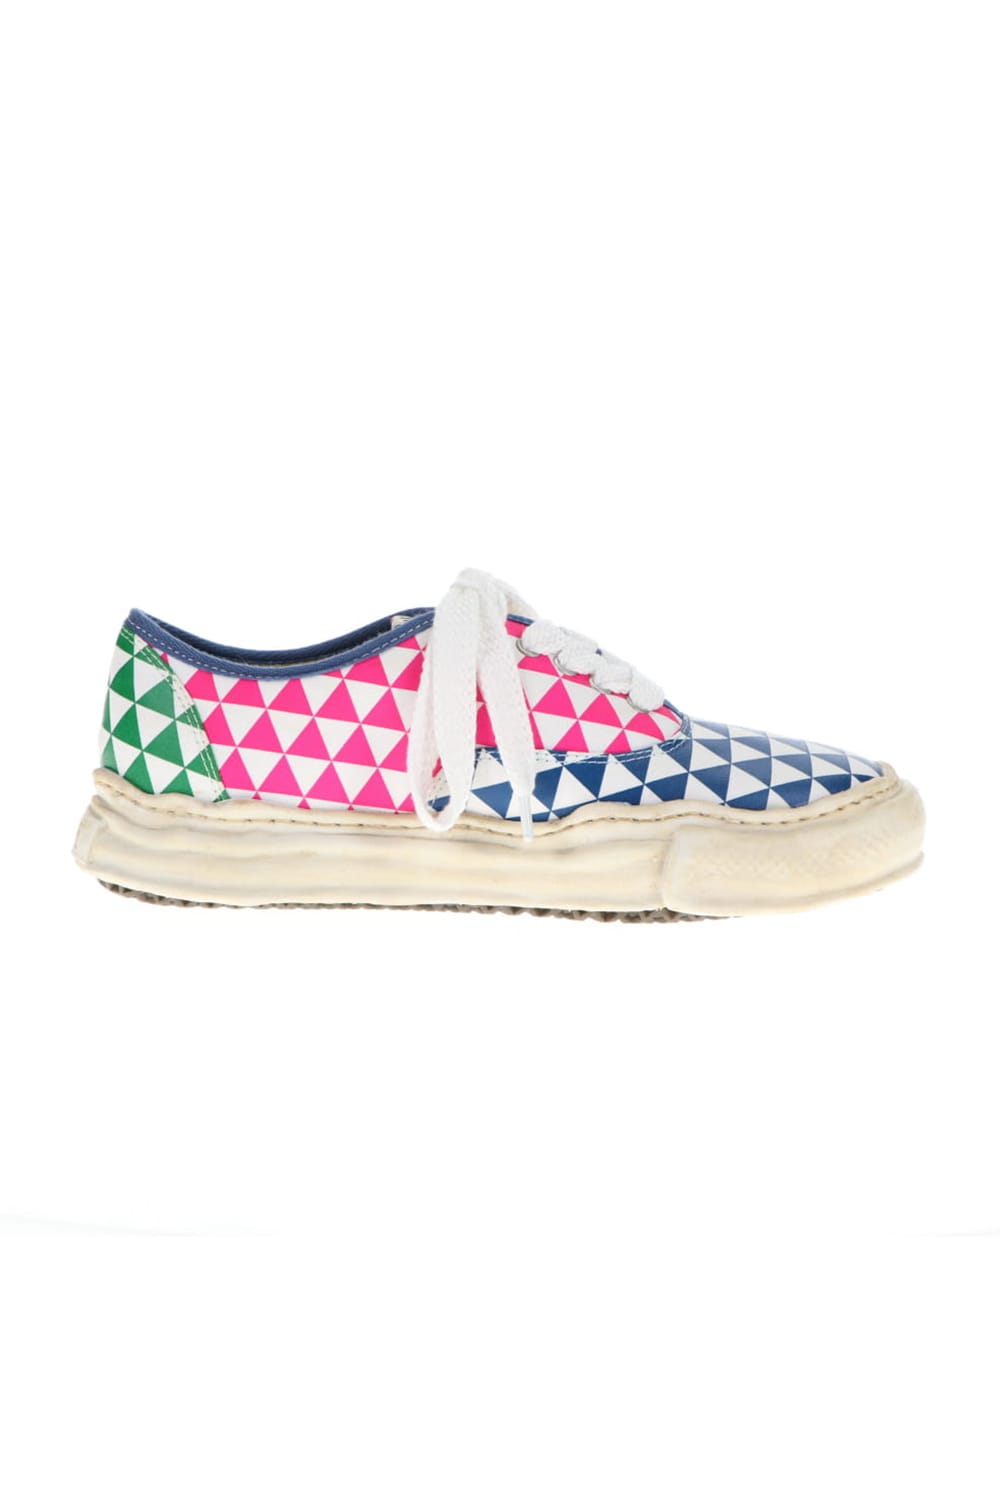 -BAKER- Over-dyed original sole printed canvas Low-Top sneakers Multi